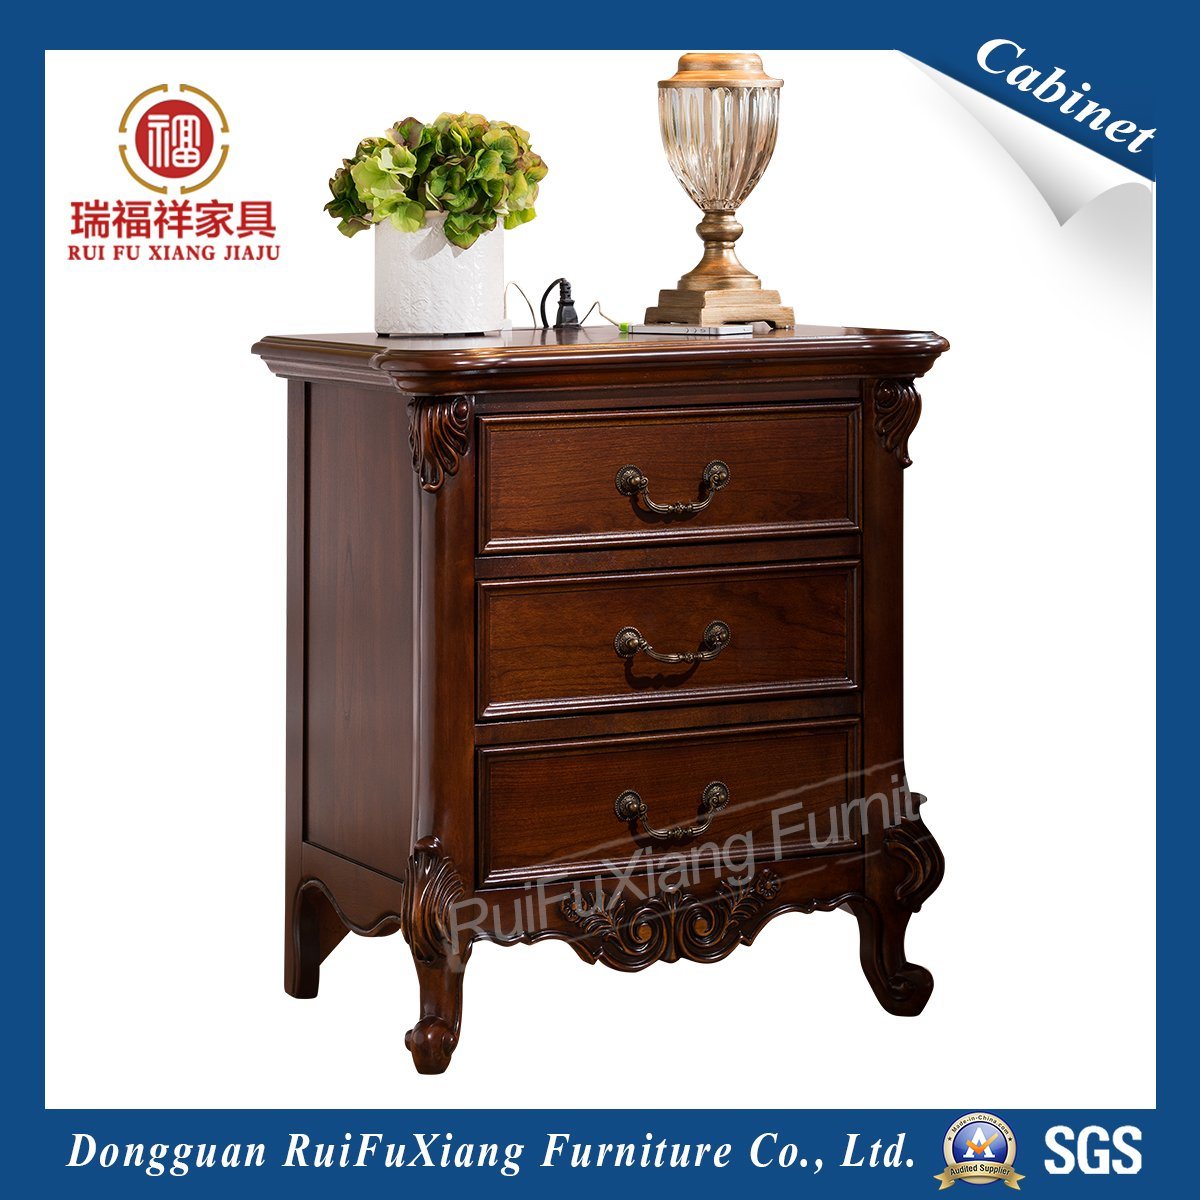 Ruifuxiang Hand Carved Oak Color Wooden Bedside Table (C209)